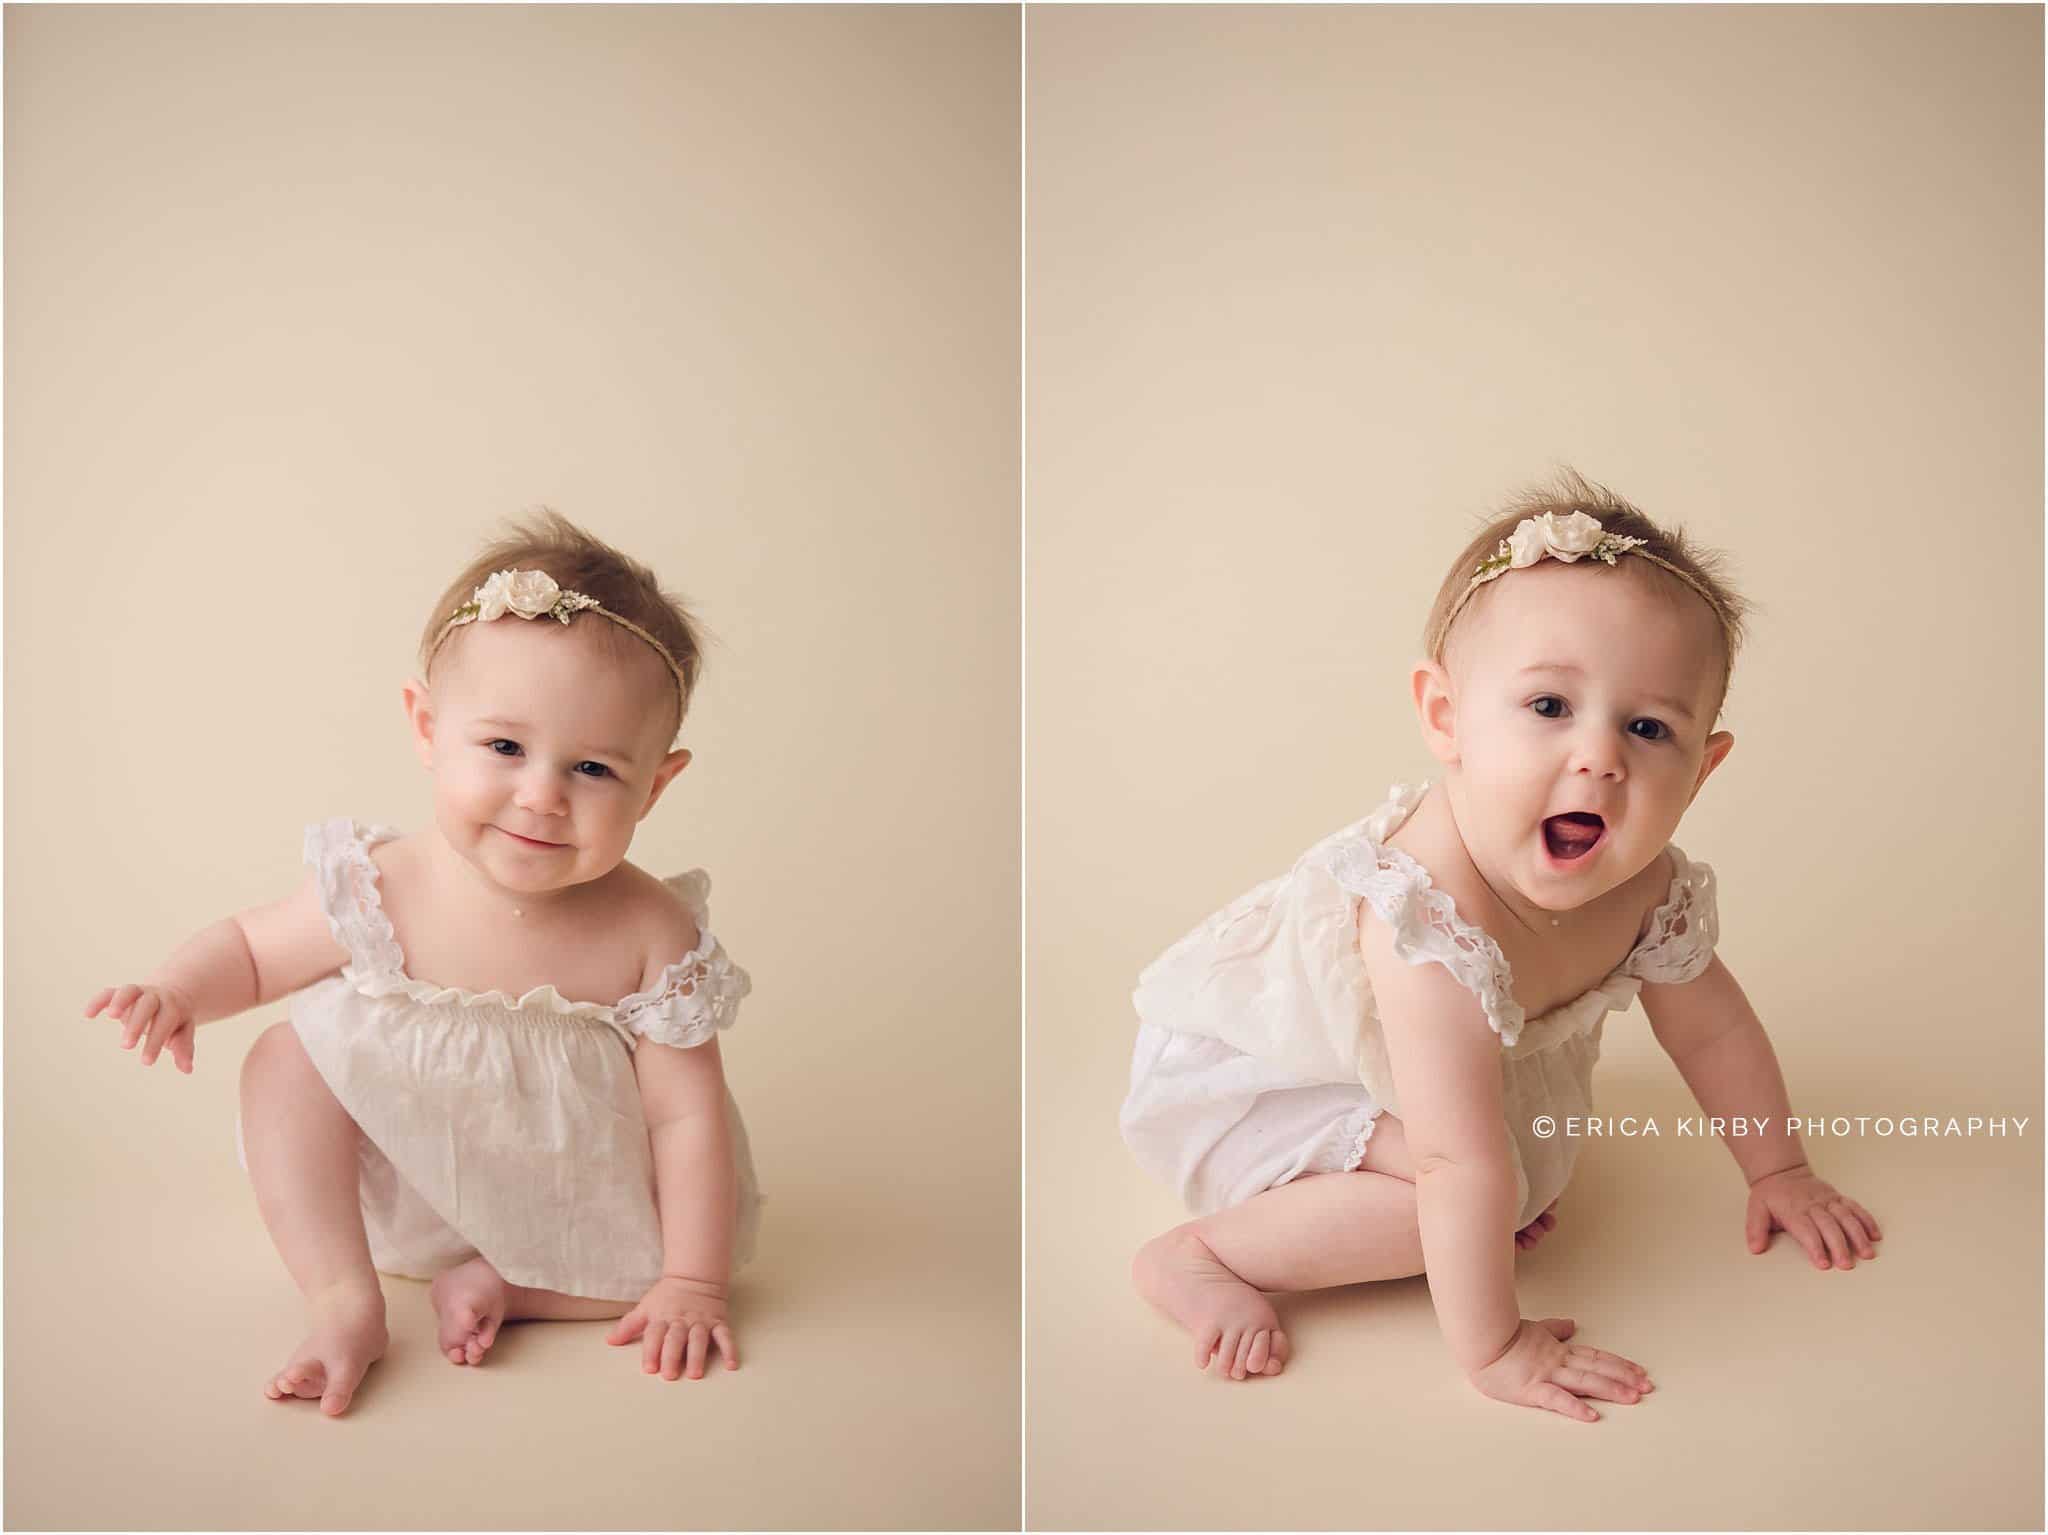 Northwest AR Baby Photography 9 Month old baby girl milestone session in Bentonville AR photography studio with creams and purples | Erica Kirby Photography - NWA Baby Photographer